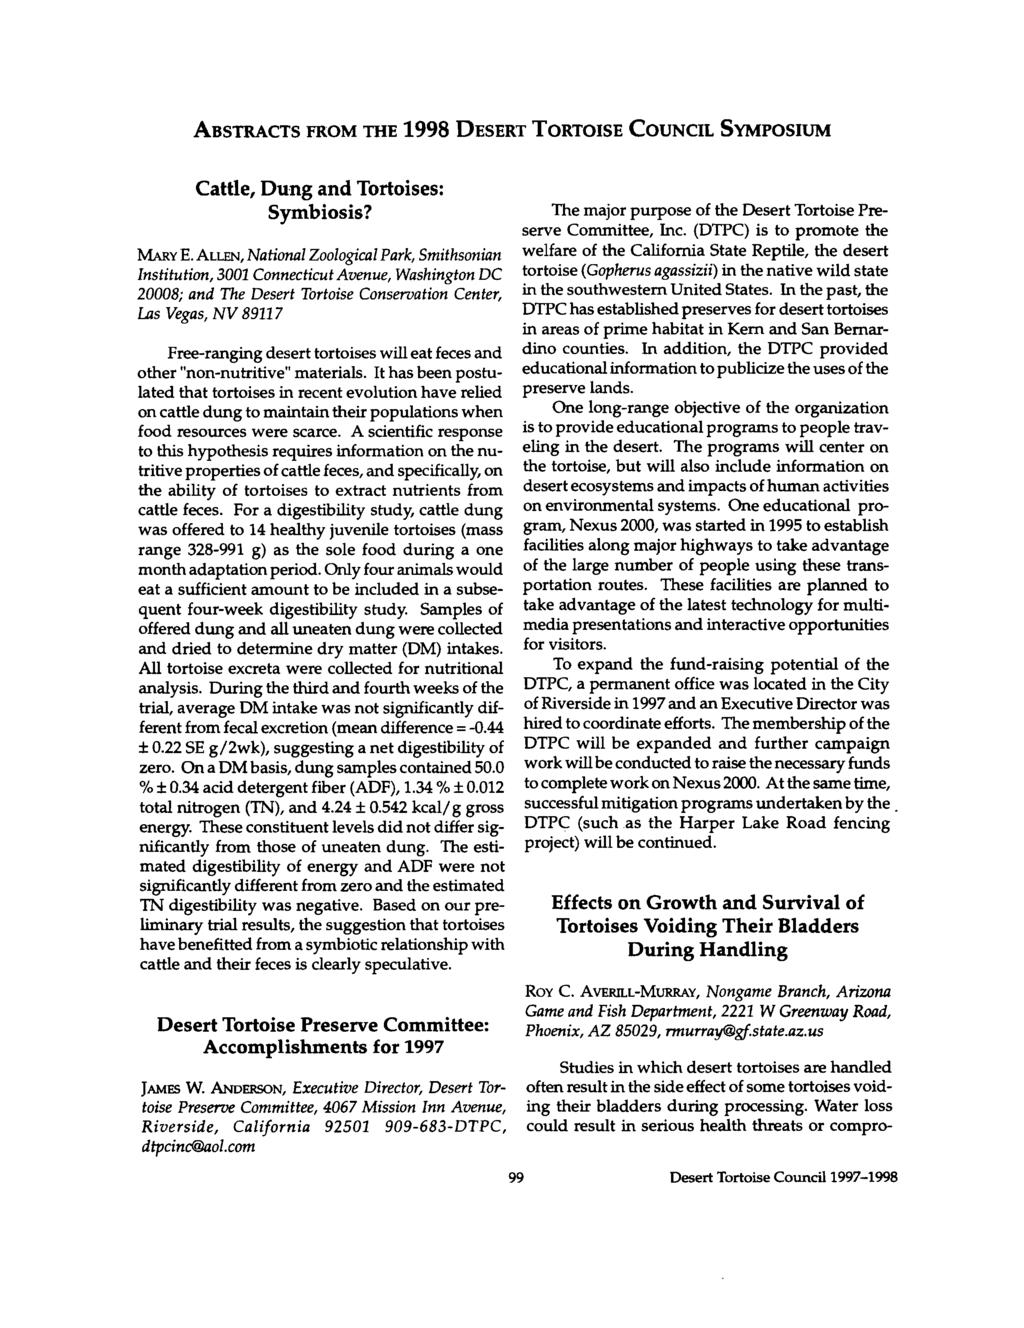 ABSTRACTS FROM THE 1998 DESERT TORTOISE COU N CIL SYMPOSIUM Cattle, Dung and Tortoises: Symbiosis? The major purpose of the Desert Tortoise Preserve Committee, Inc. (DTPC) is to promote the MARY E.